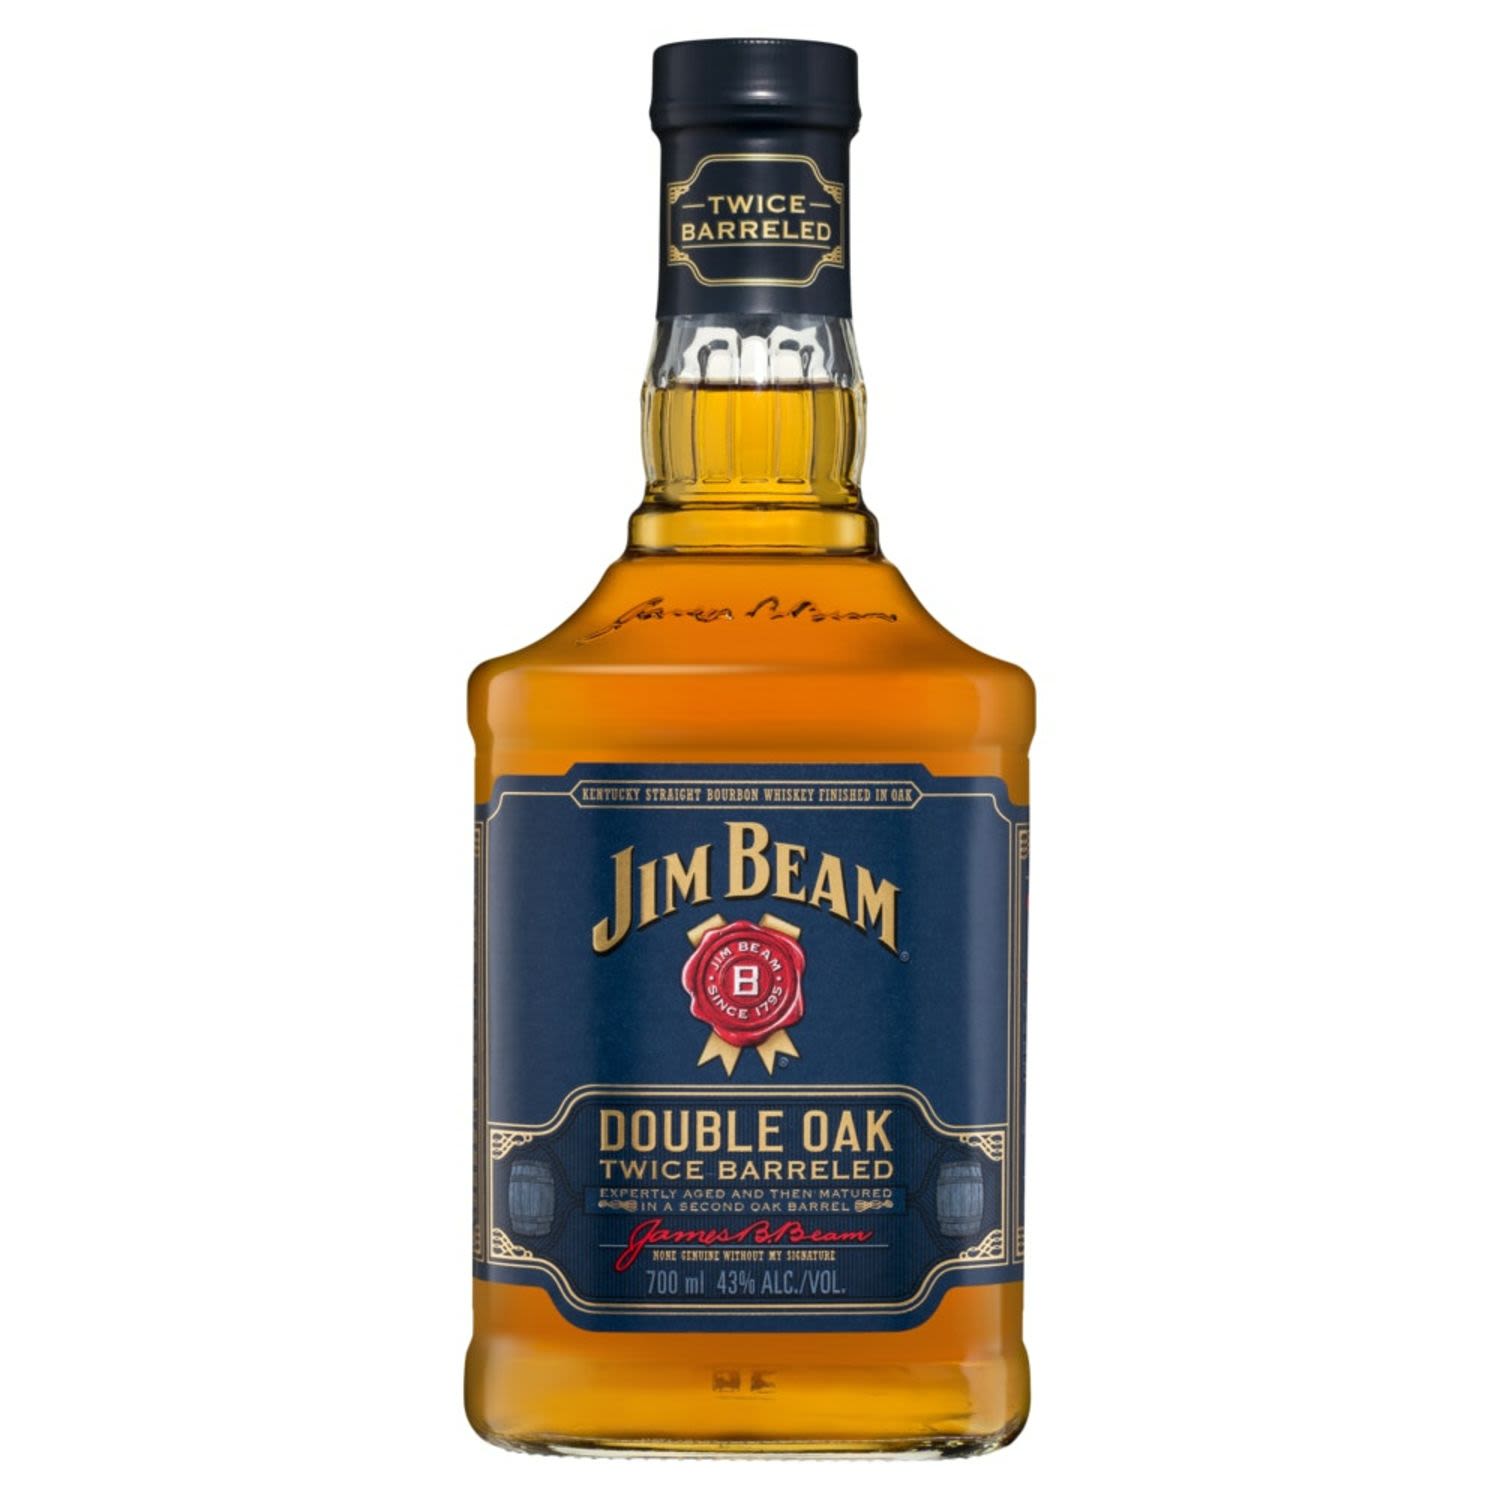 Jim Beam Double Oak takes bourbon aging to the next level by using a multi-barrelled approach. It all starts with Jim Beam®, the World’s #1 Bourbon. Then, after the traditional 4-year aging process, the bourbon is transferred to a second freshly charred American White Oak barrel and aged to taste. This second barrelling allows the liquid to develop an even deeper level of intense, spiced oakiness and rich caramel, creating a truly unique bourbon whiskey.<br /> <br />Alcohol Volume: 43.00%<br /><br />Pack Format: Bottle<br /><br />Standard Drinks: 23.8<br /><br />Pack Type: Bottle<br /><br />Country of Origin: USA<br />